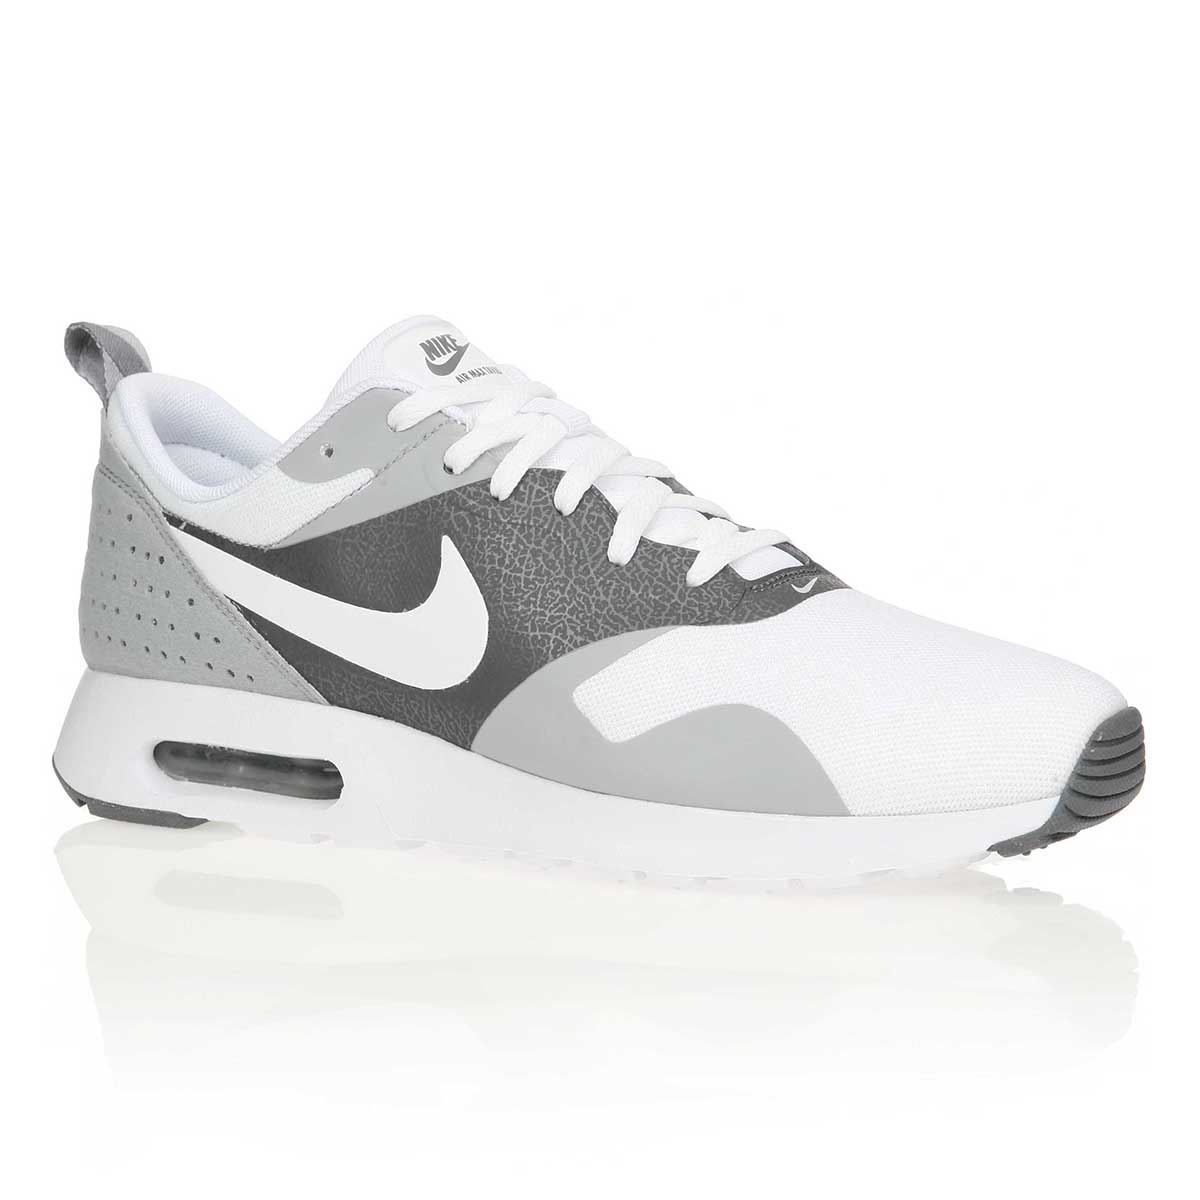 nike air max tavas chaussures de running homme, Officiel Nike Air Max Tavas Homme Chaussures Akhapilat Offre Pas Cher2017413068